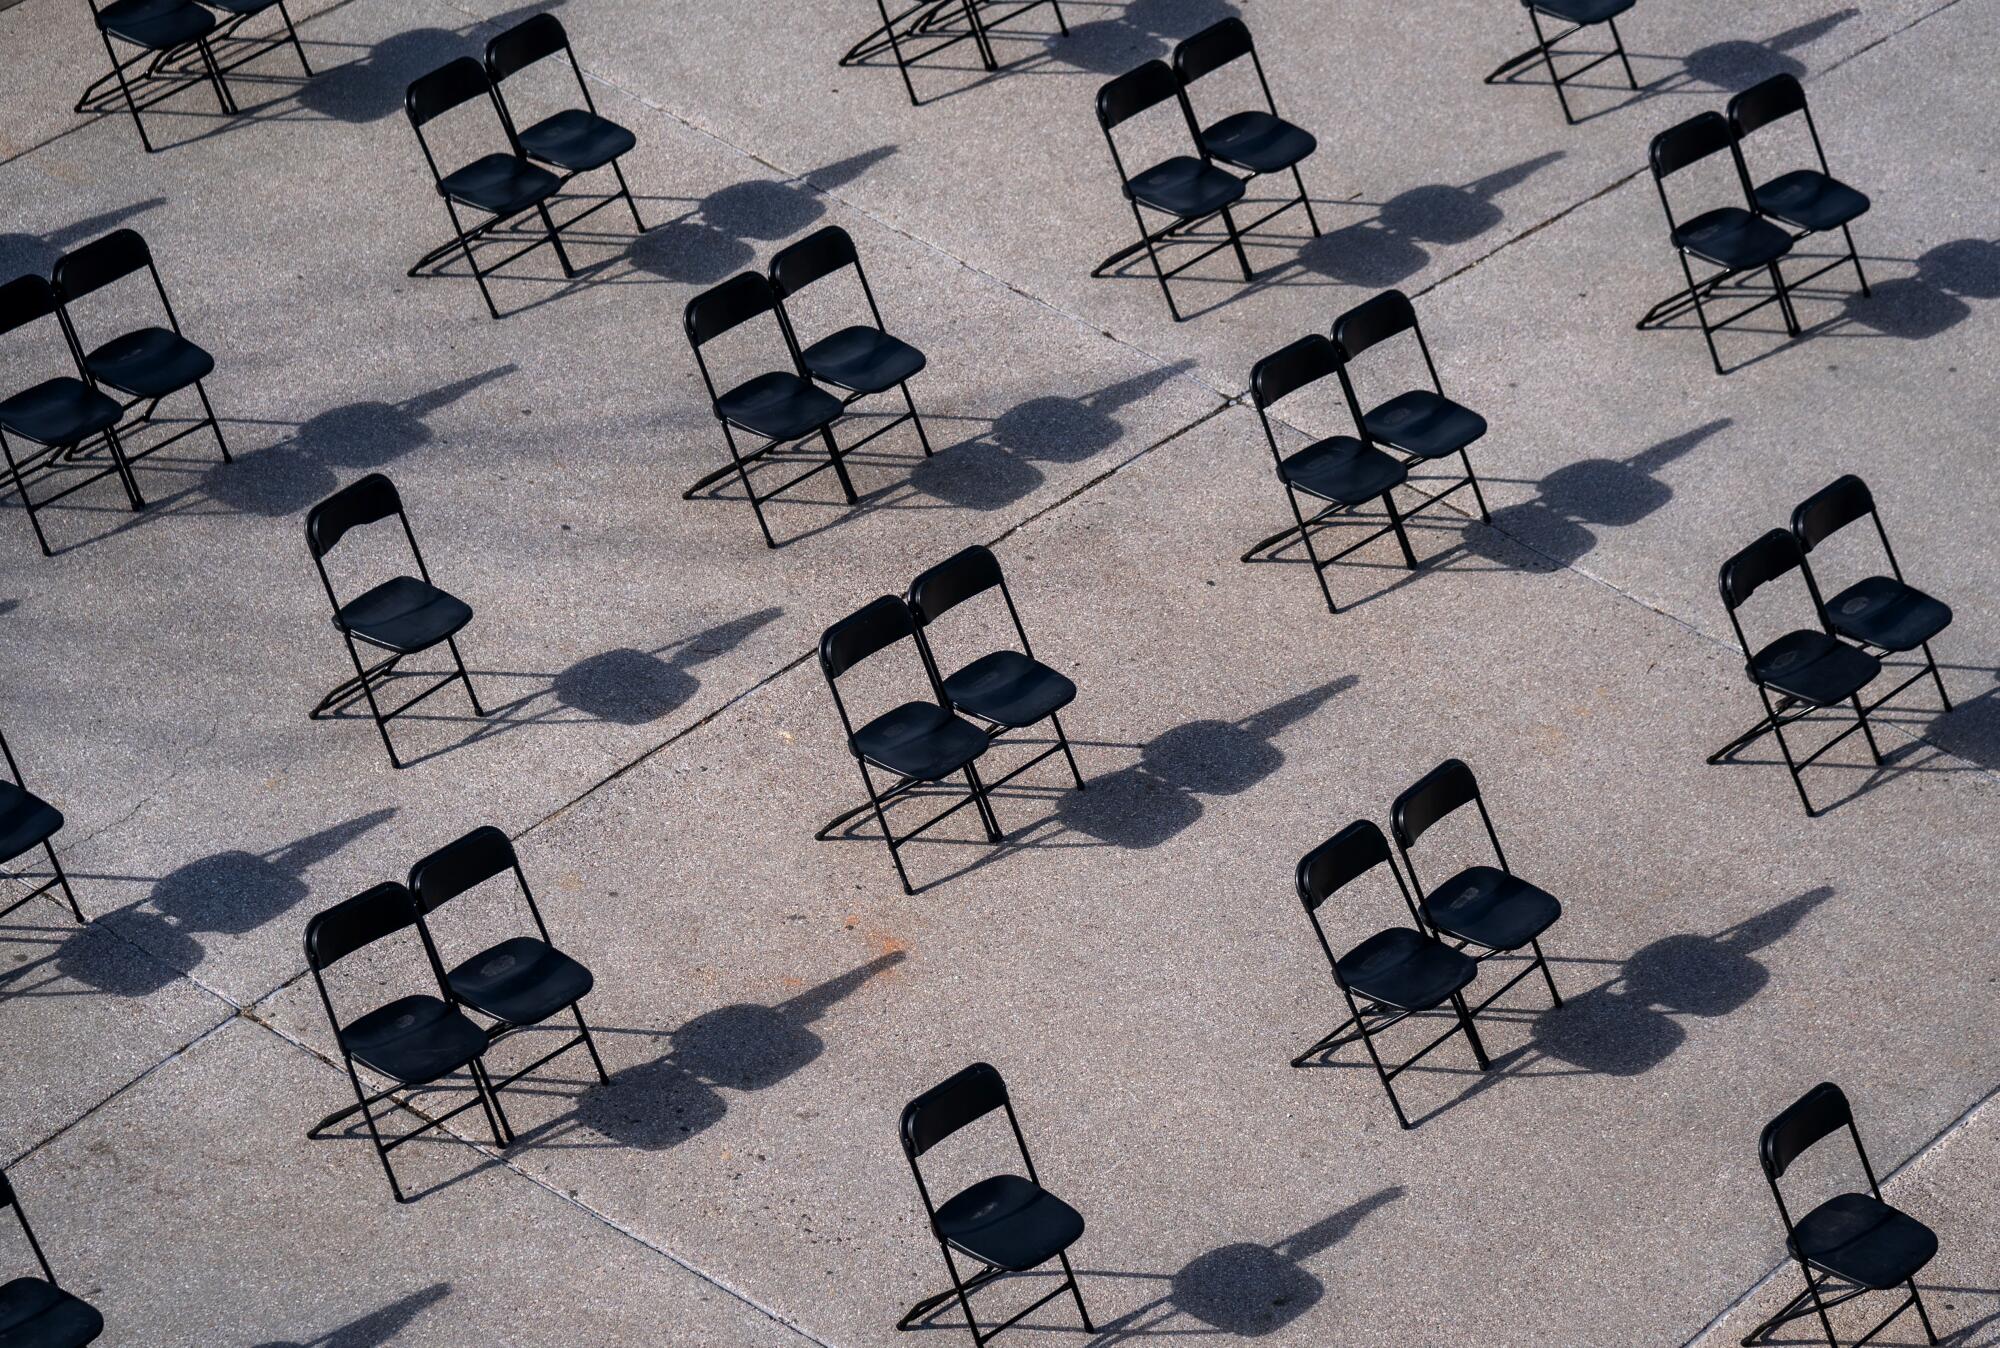 Socially distant folding chairs on the west front of the U.S. Capitol Building.